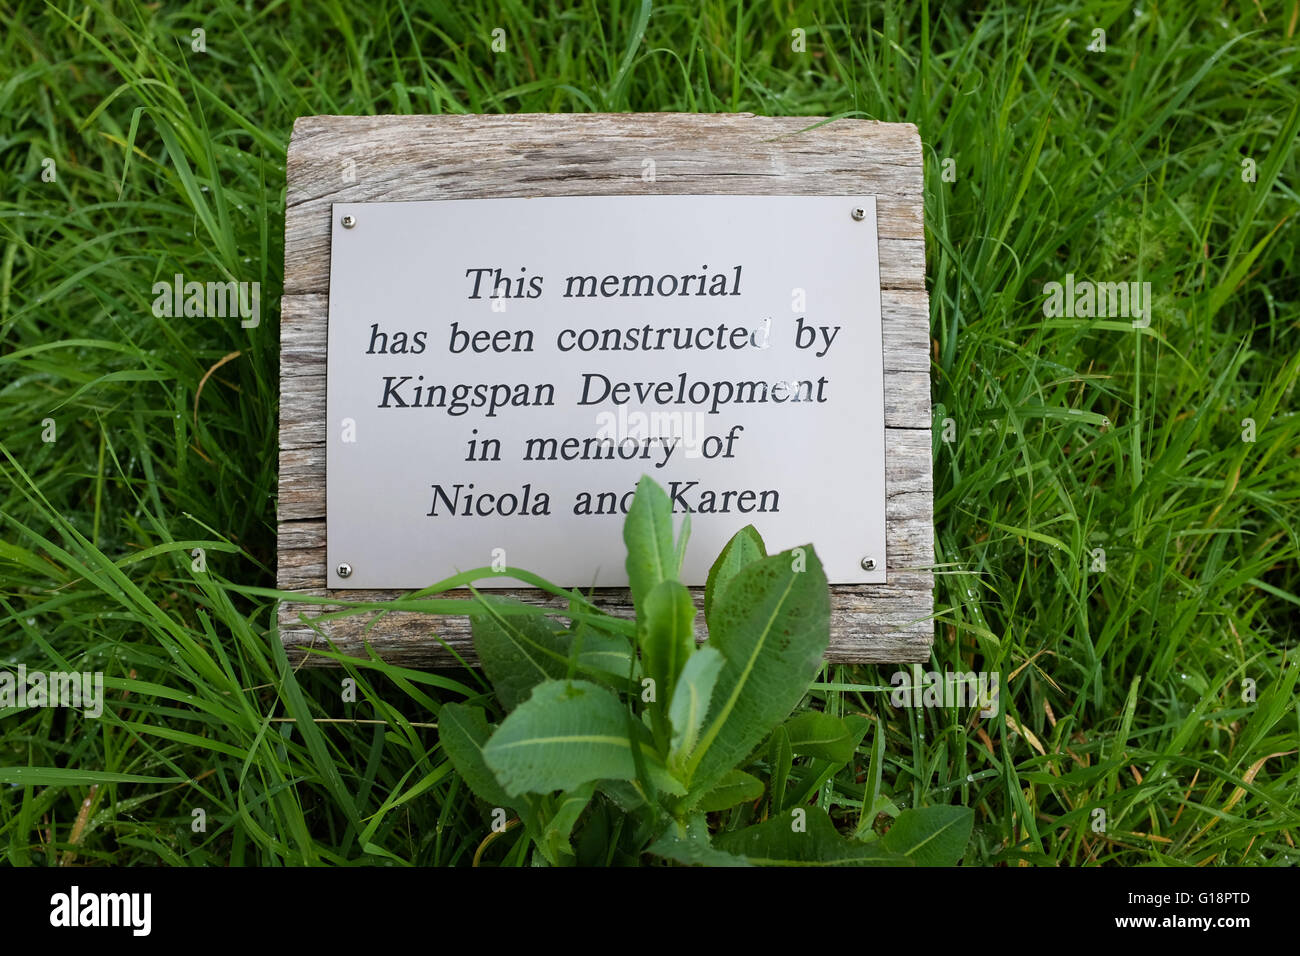 Brighton, UK. 11th May, 2016. The memorial tree at Wild Park in Brighton where the bodies of murdered schoolgirls Nicola Fellows and Karen Hadaway were discovered almost 30 years ago . A man was arrested yesterday in connection with what became known as The Babes in the Wood Murders  © Simon Dack/Alamy Live News  Credit:  Simon Dack/Alamy Live News Stock Photo